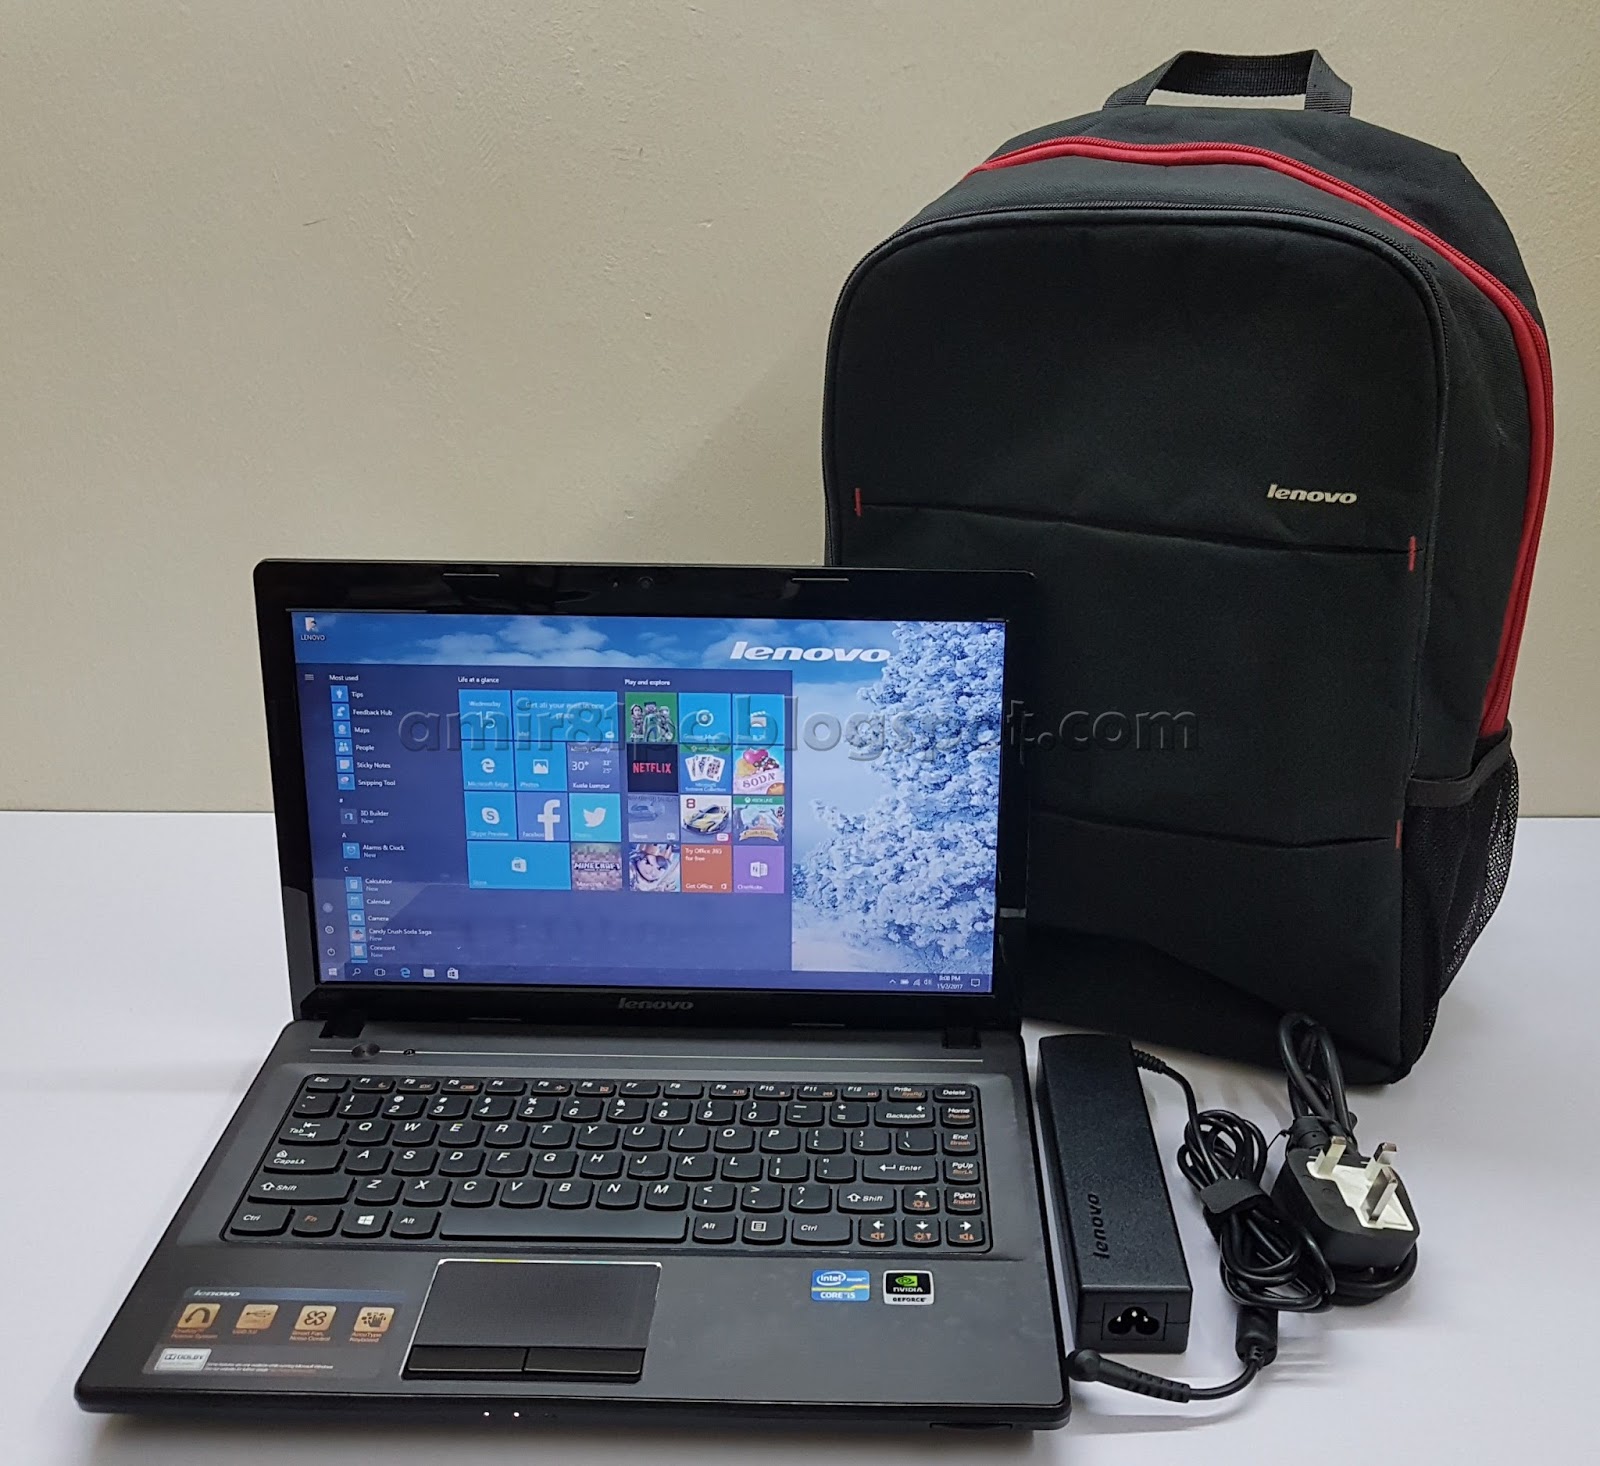 Three A Tech Computer Sales and Services: Used Laptop Lenovo G480 